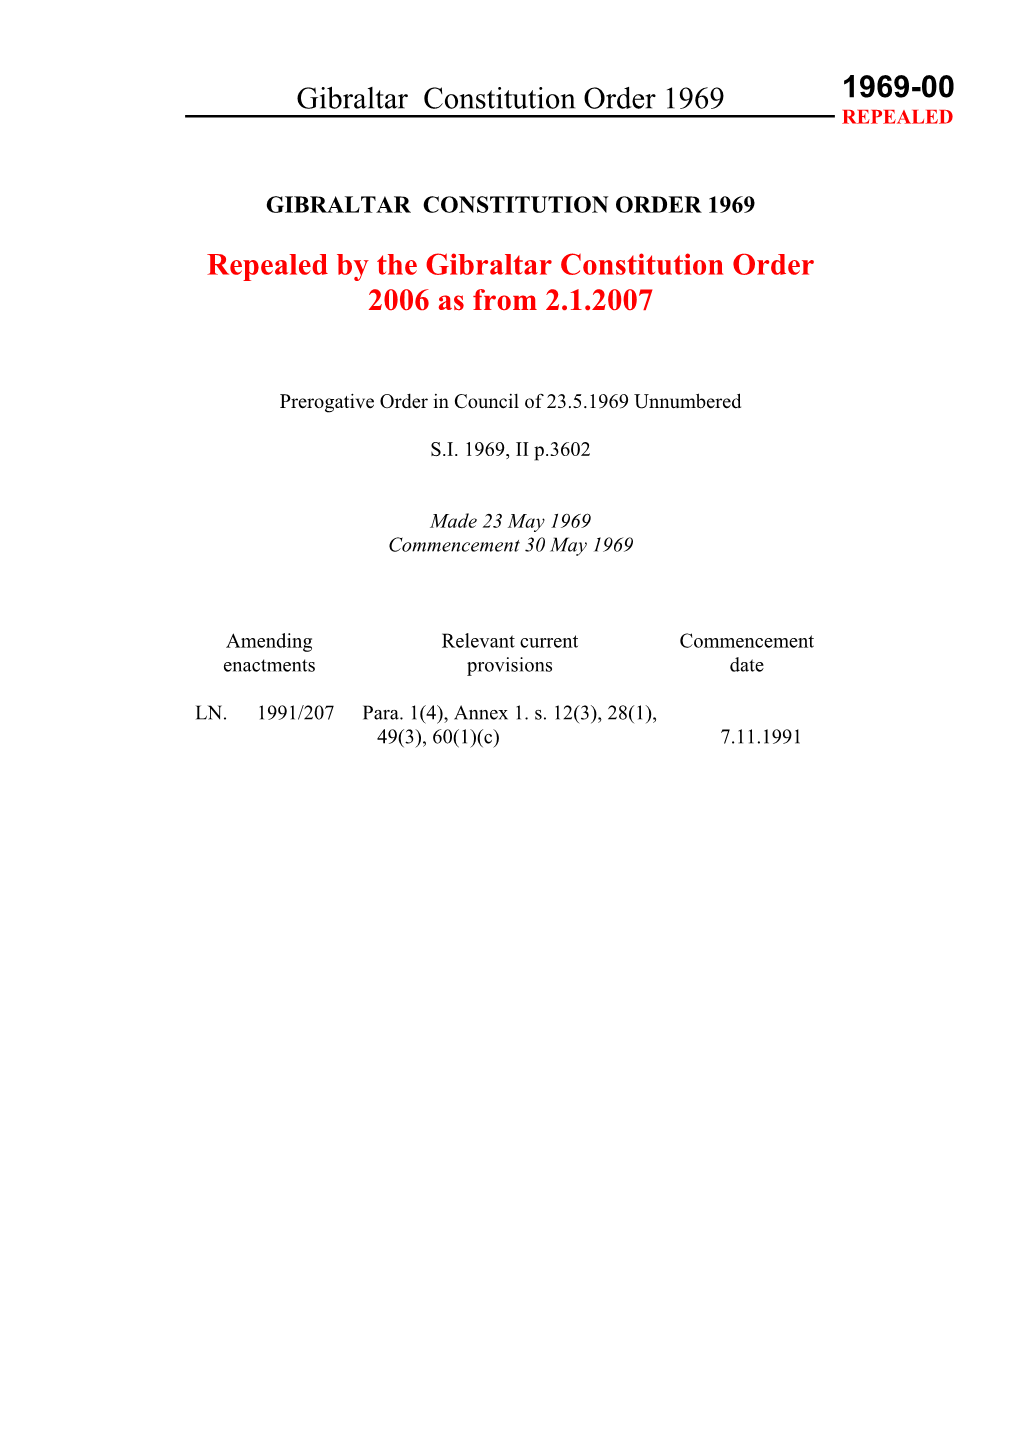 Repealed by the Gibraltar Constitution Order 2006 As from 2.1.2007